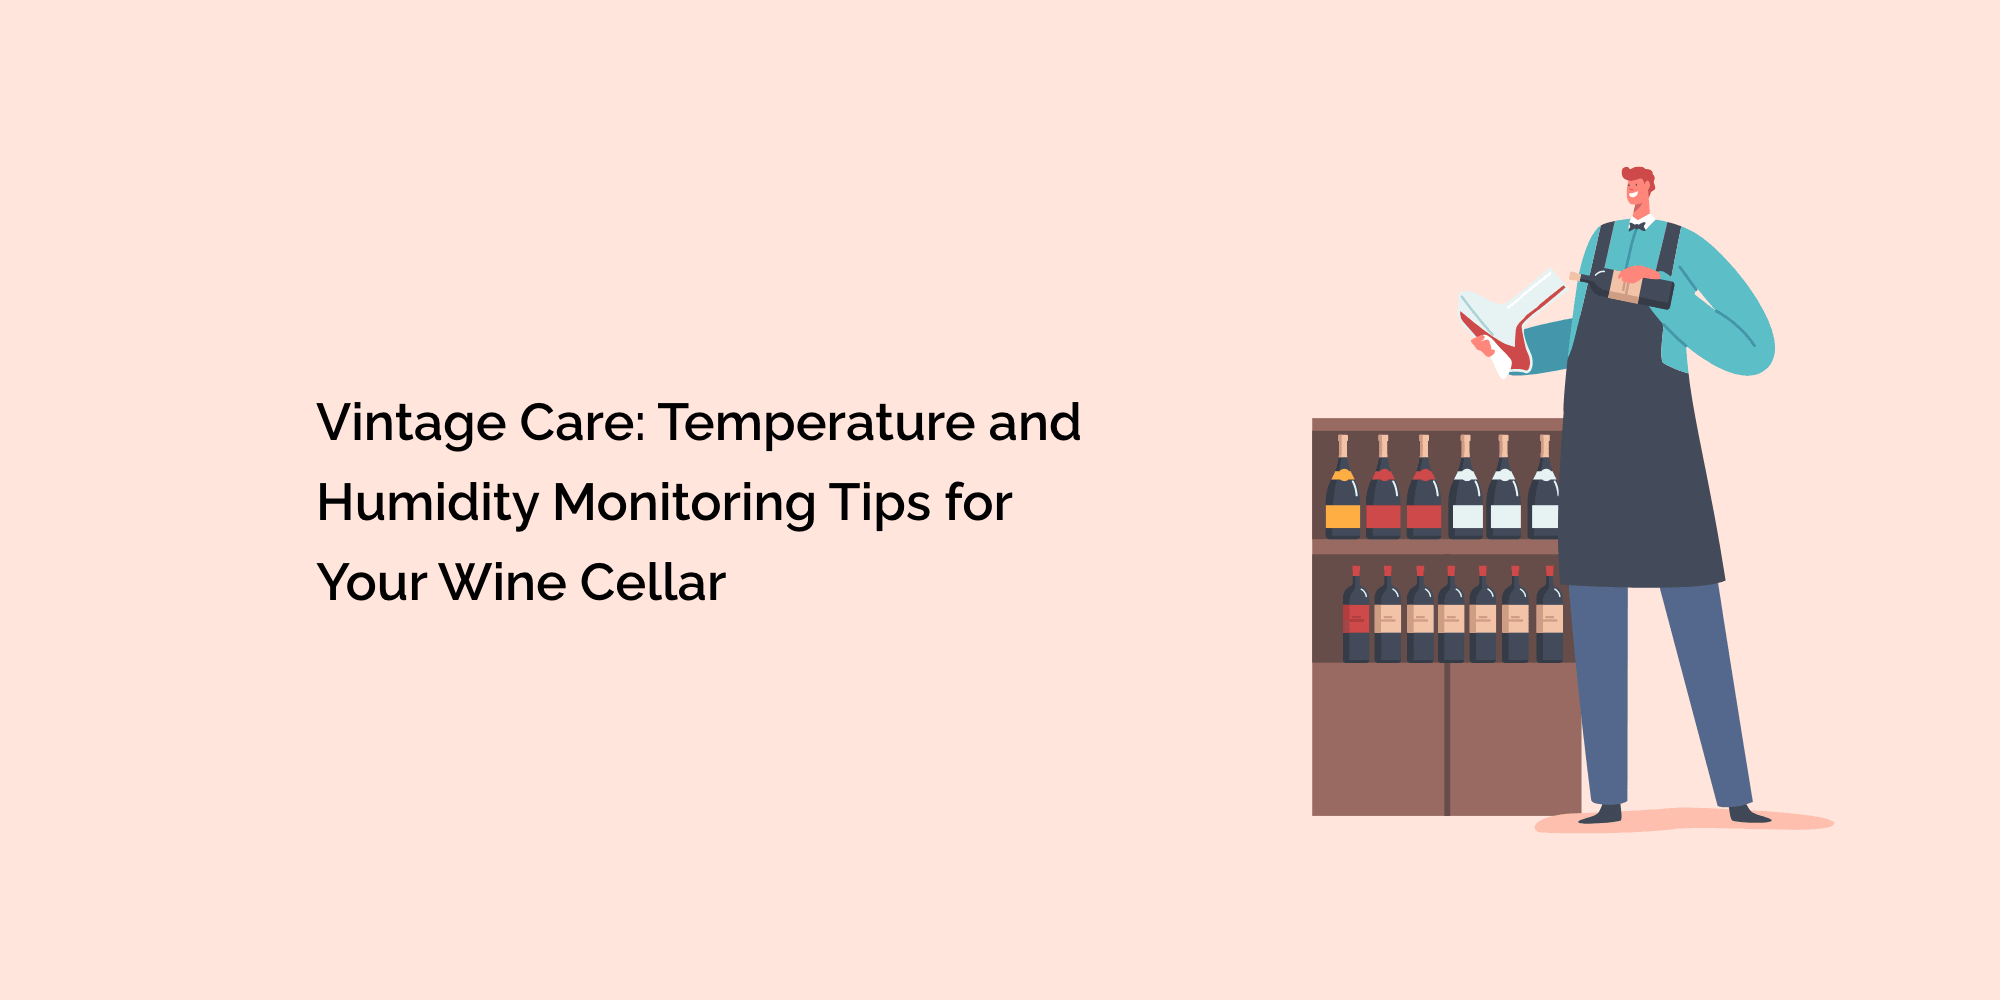 Vintage Care: Temperature and Humidity Monitoring Tips for Your Wine Cellar